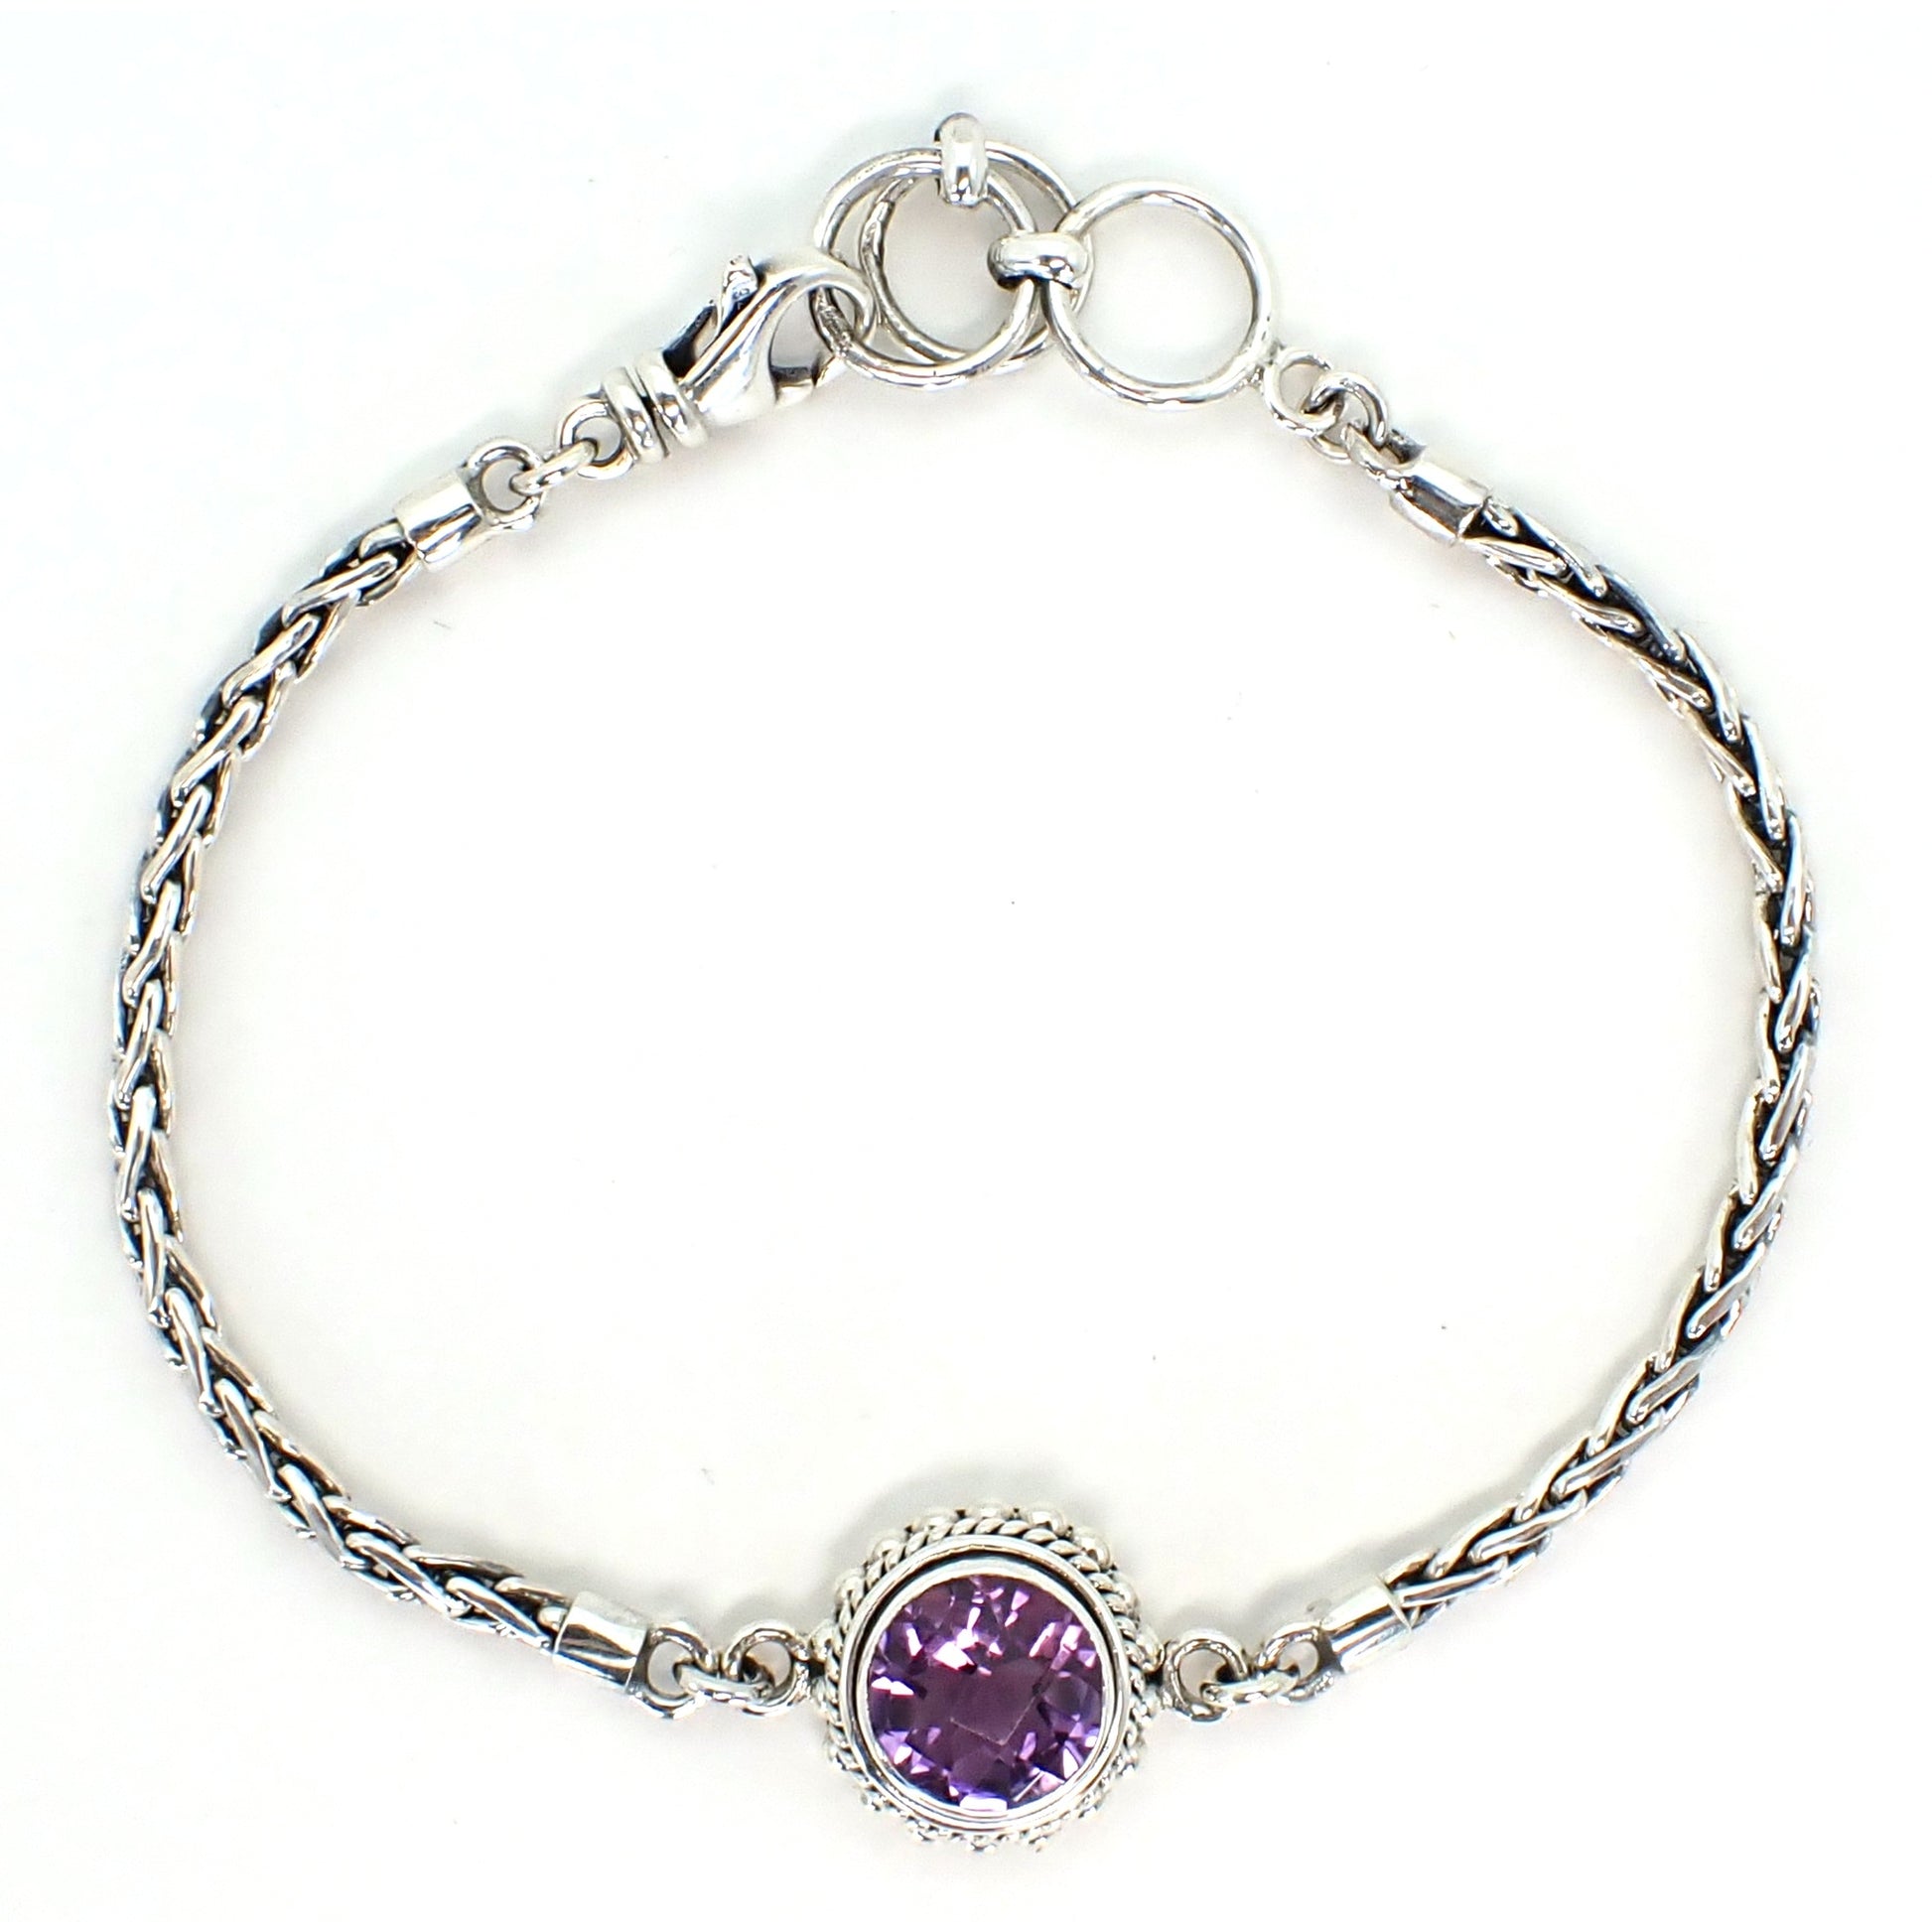 Silver bracelet with wheat chain arms and a single purple, round amethyst gemstone in the center.